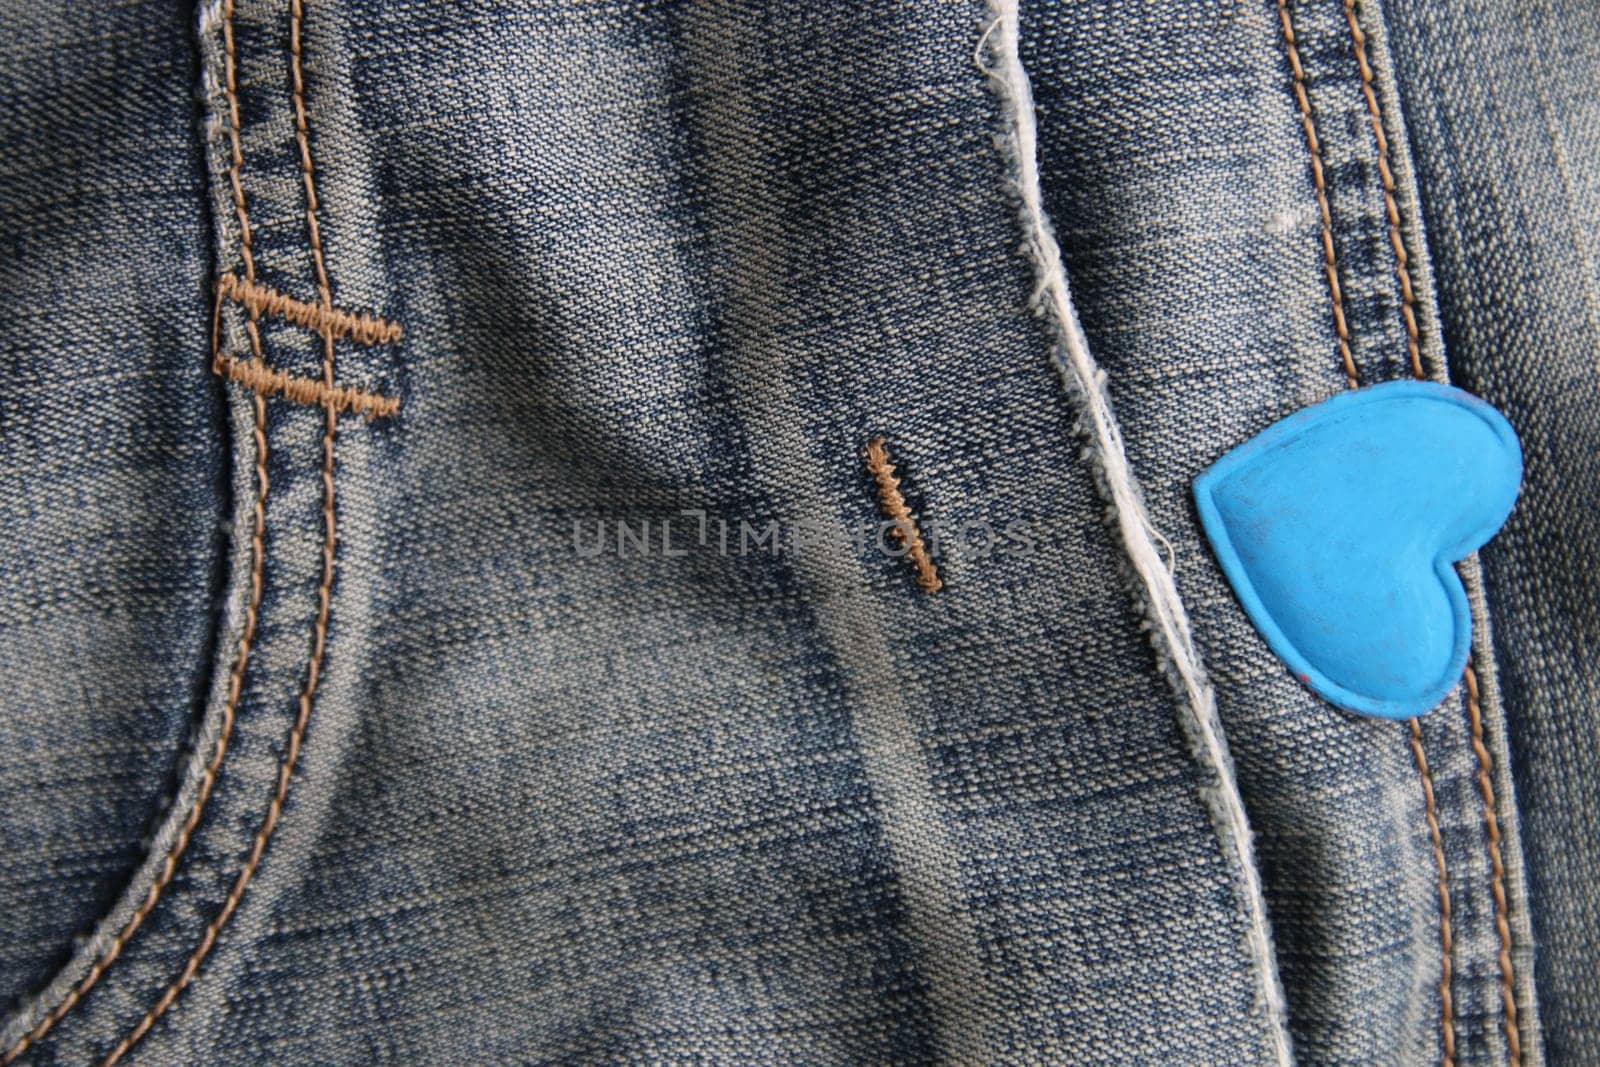 Blue heart on jeans. Creative Birthday background.